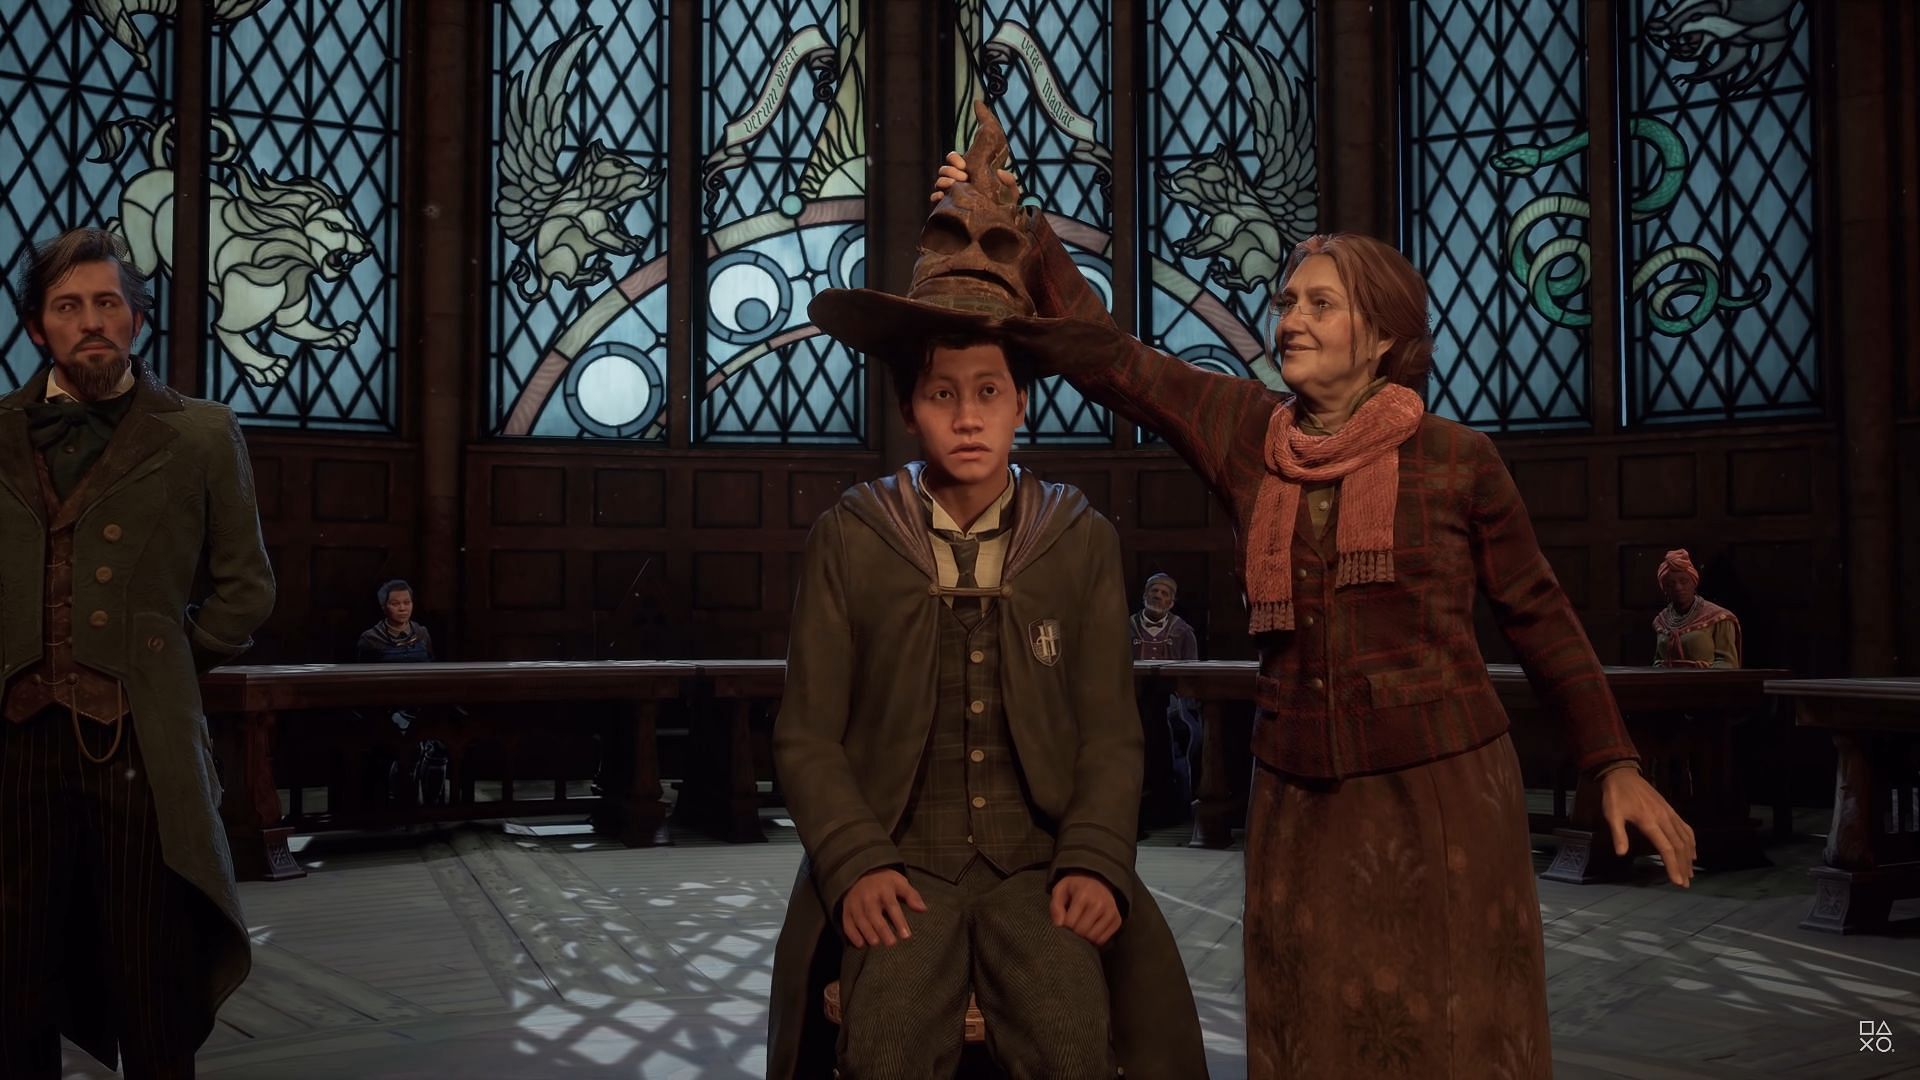 will hogwarts legacy have character creation